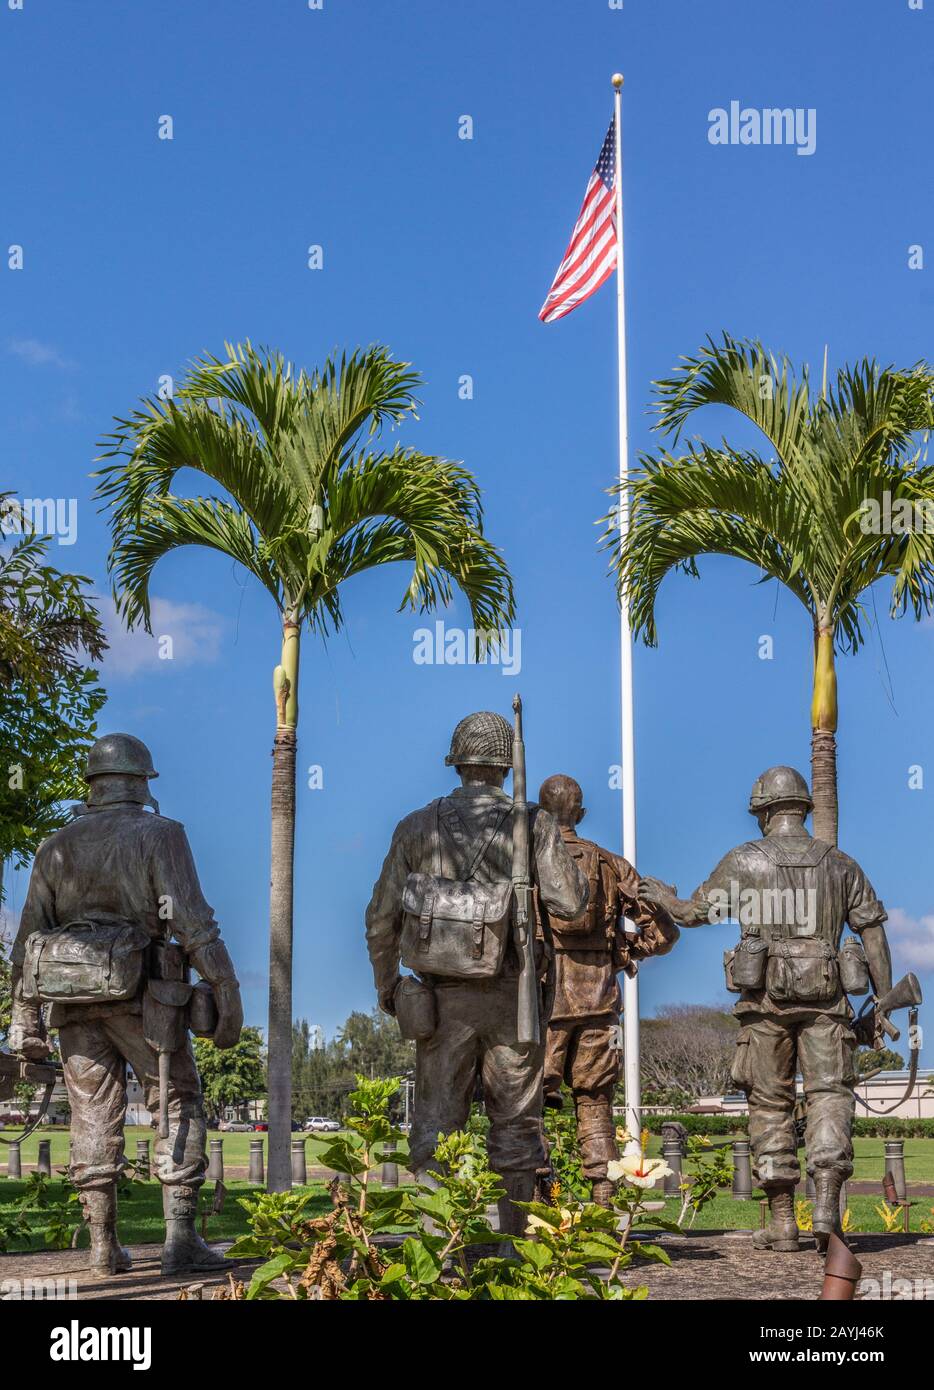 Oahu, Hawaii, USA. - January 10, 2012: United In Sacrifice group statue seen from back in front of US flag under blue skay at Schofield Barracks of Ar Stock Photo